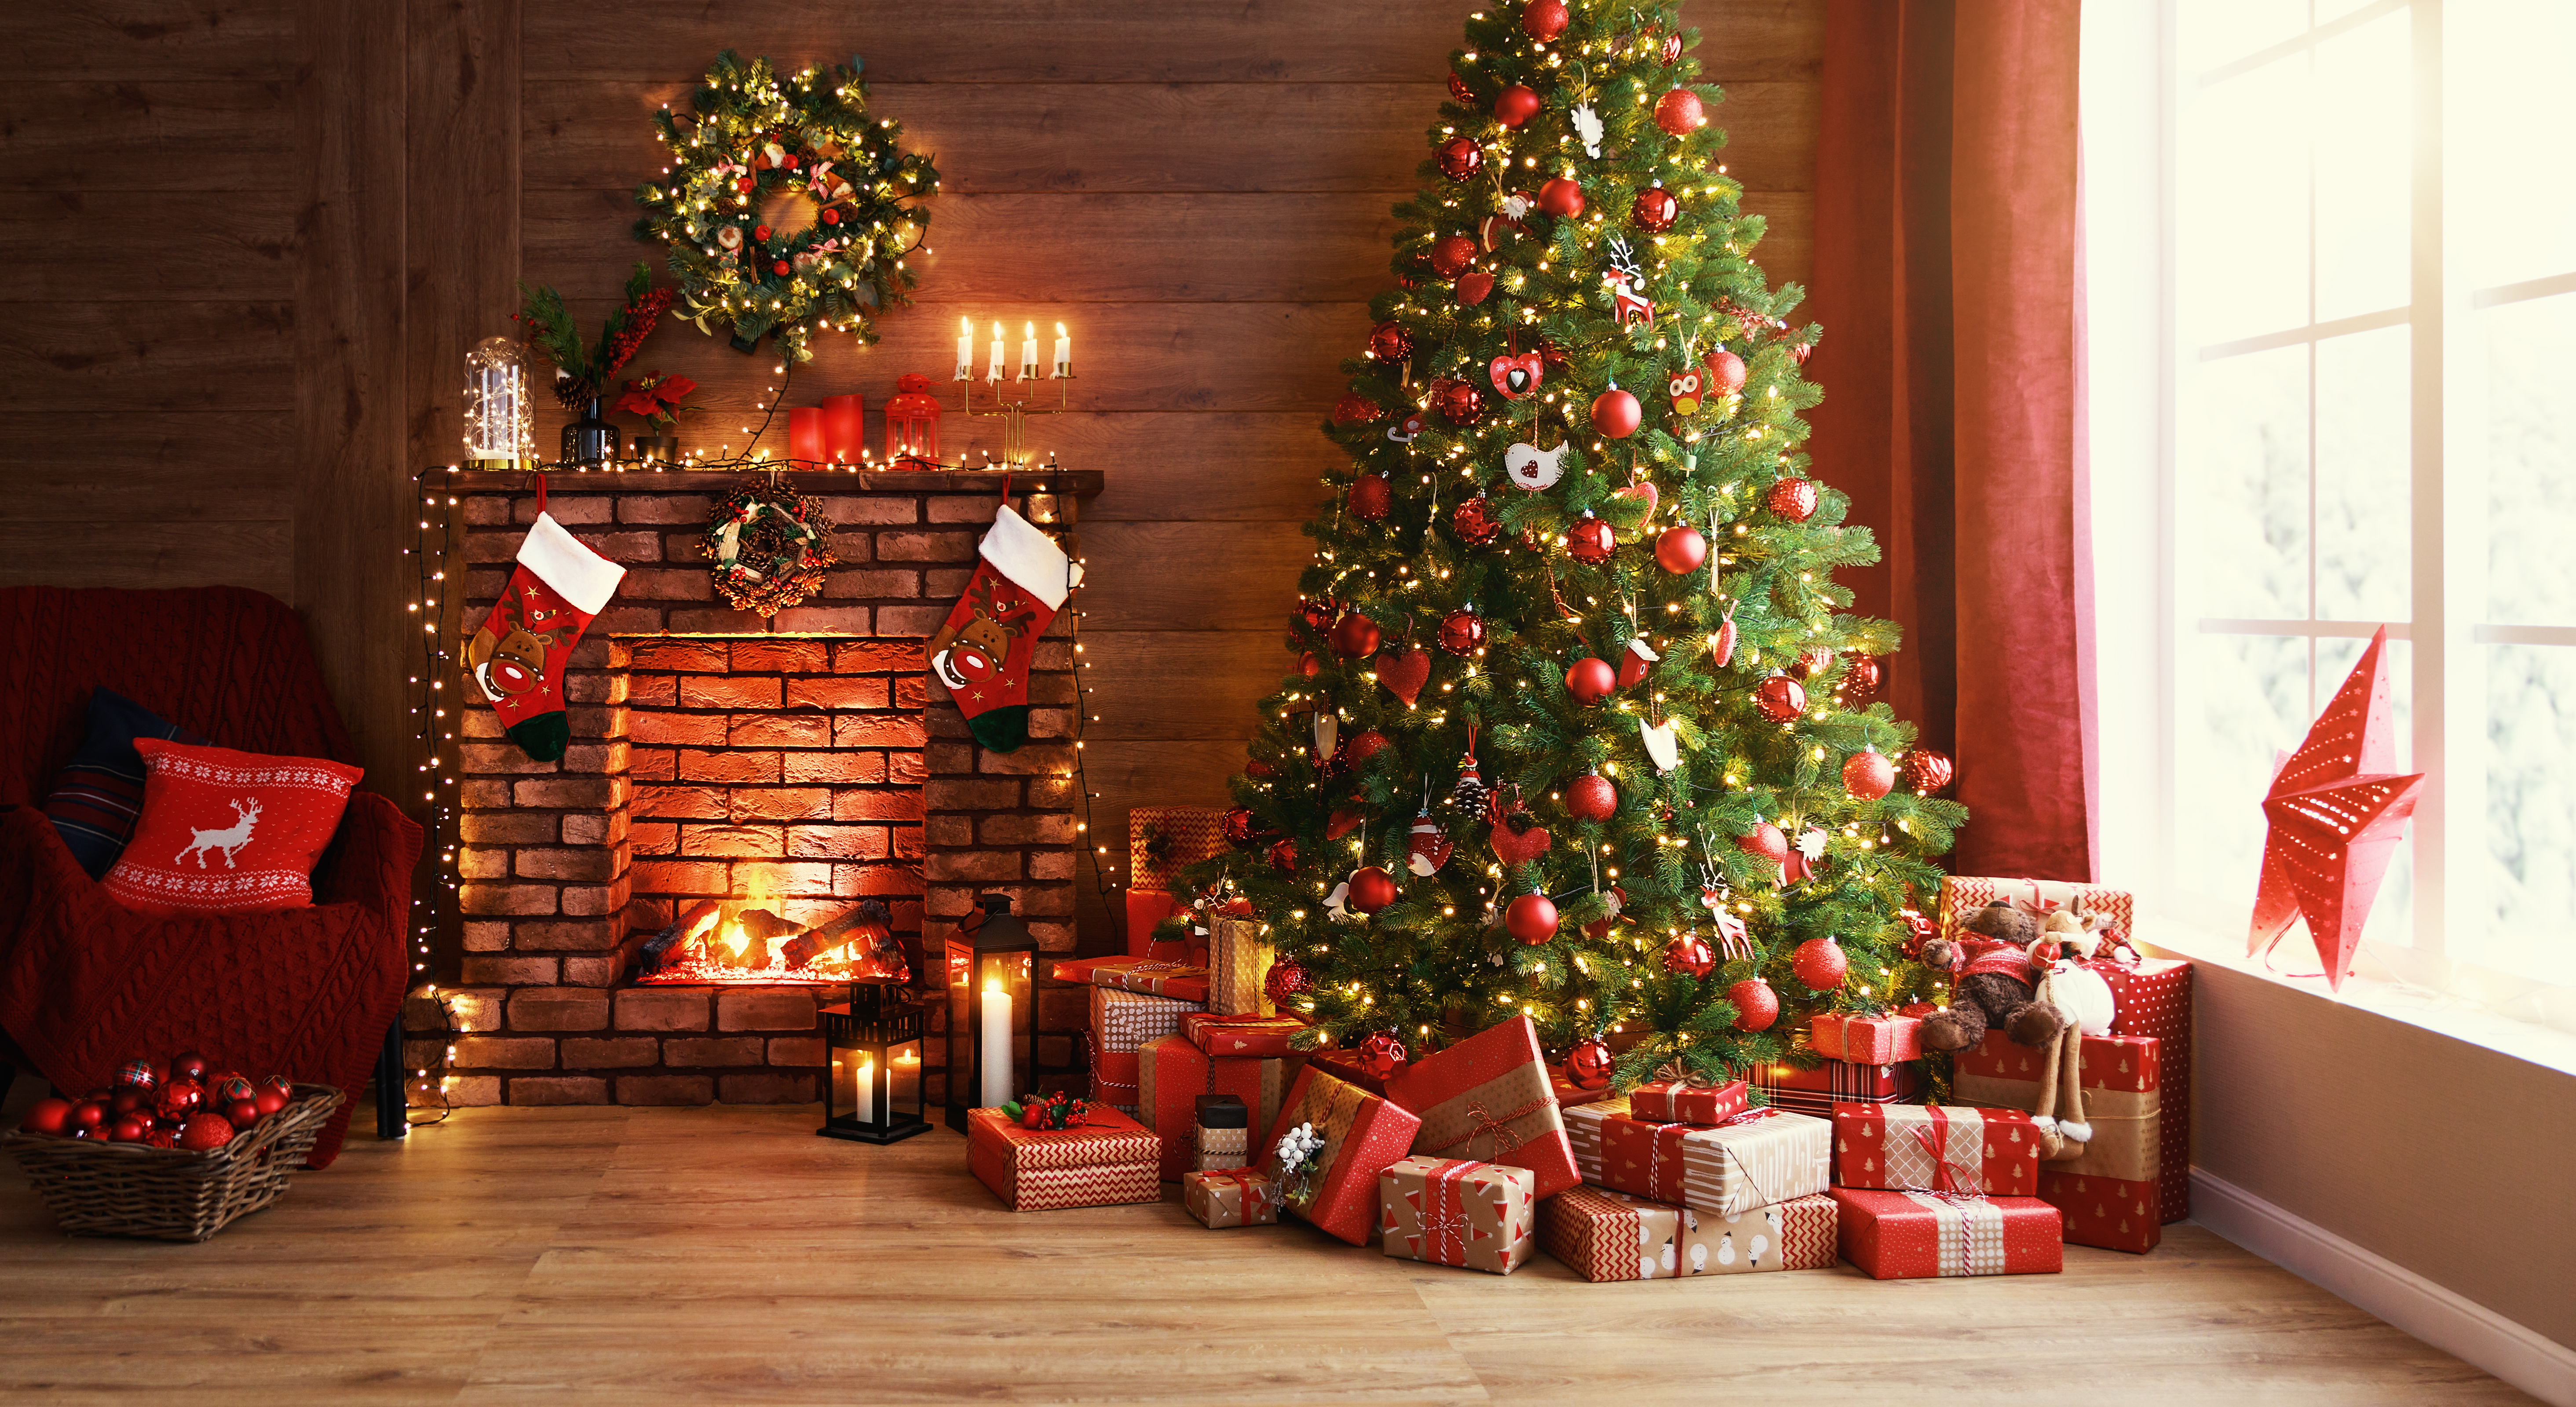 Gift boxes under a Christmas tree | Source: Shutterstock